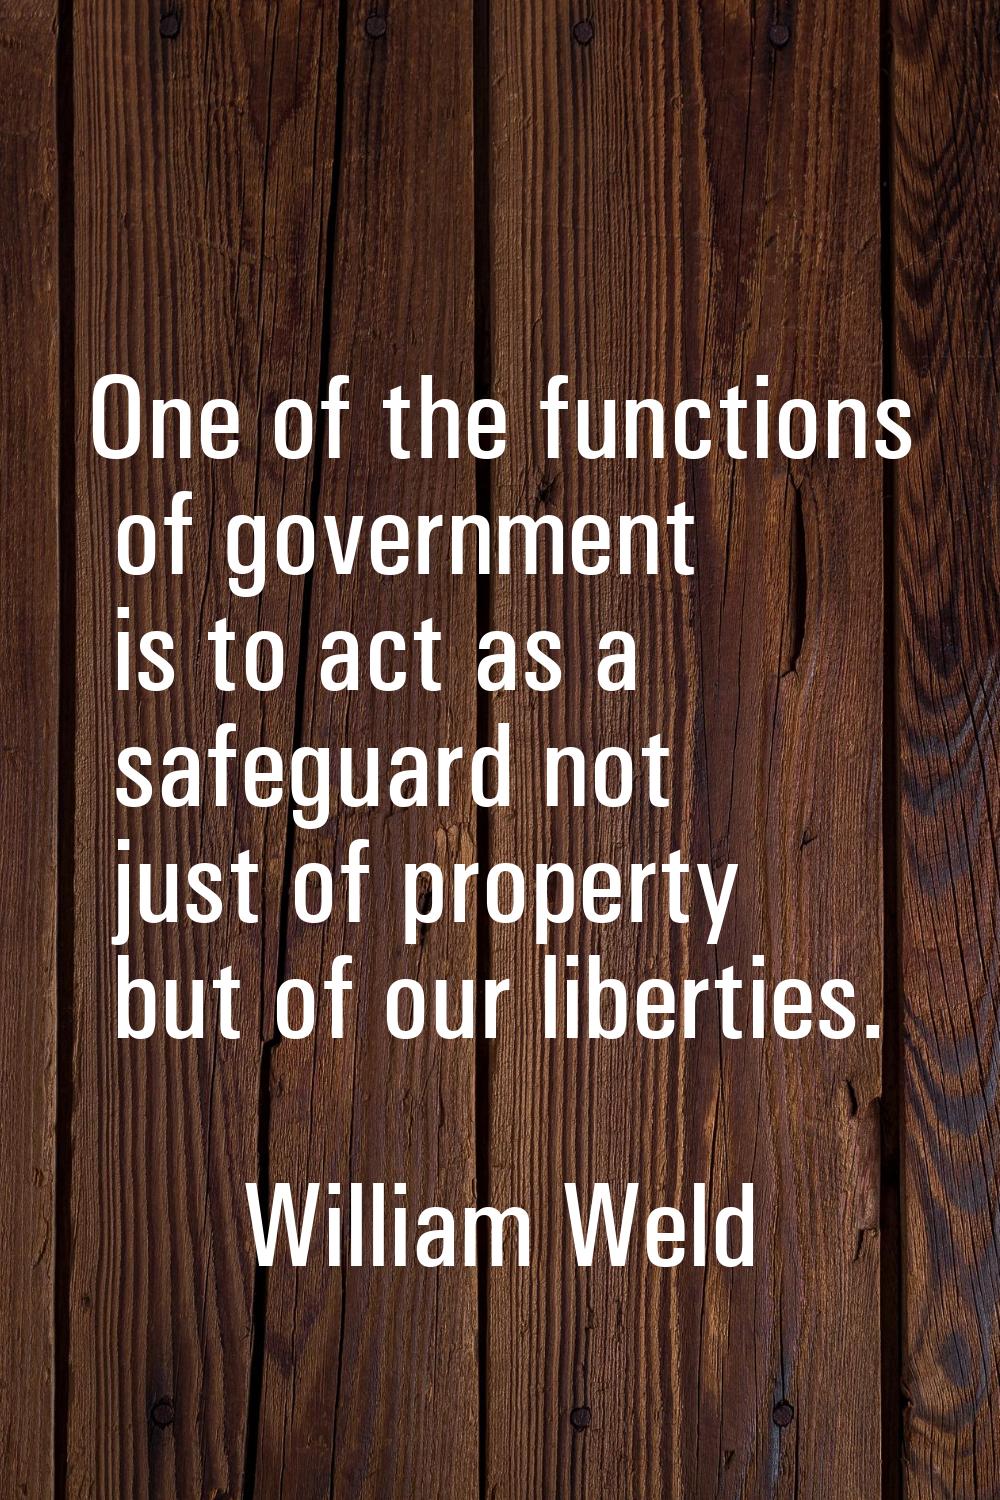 One of the functions of government is to act as a safeguard not just of property but of our liberti